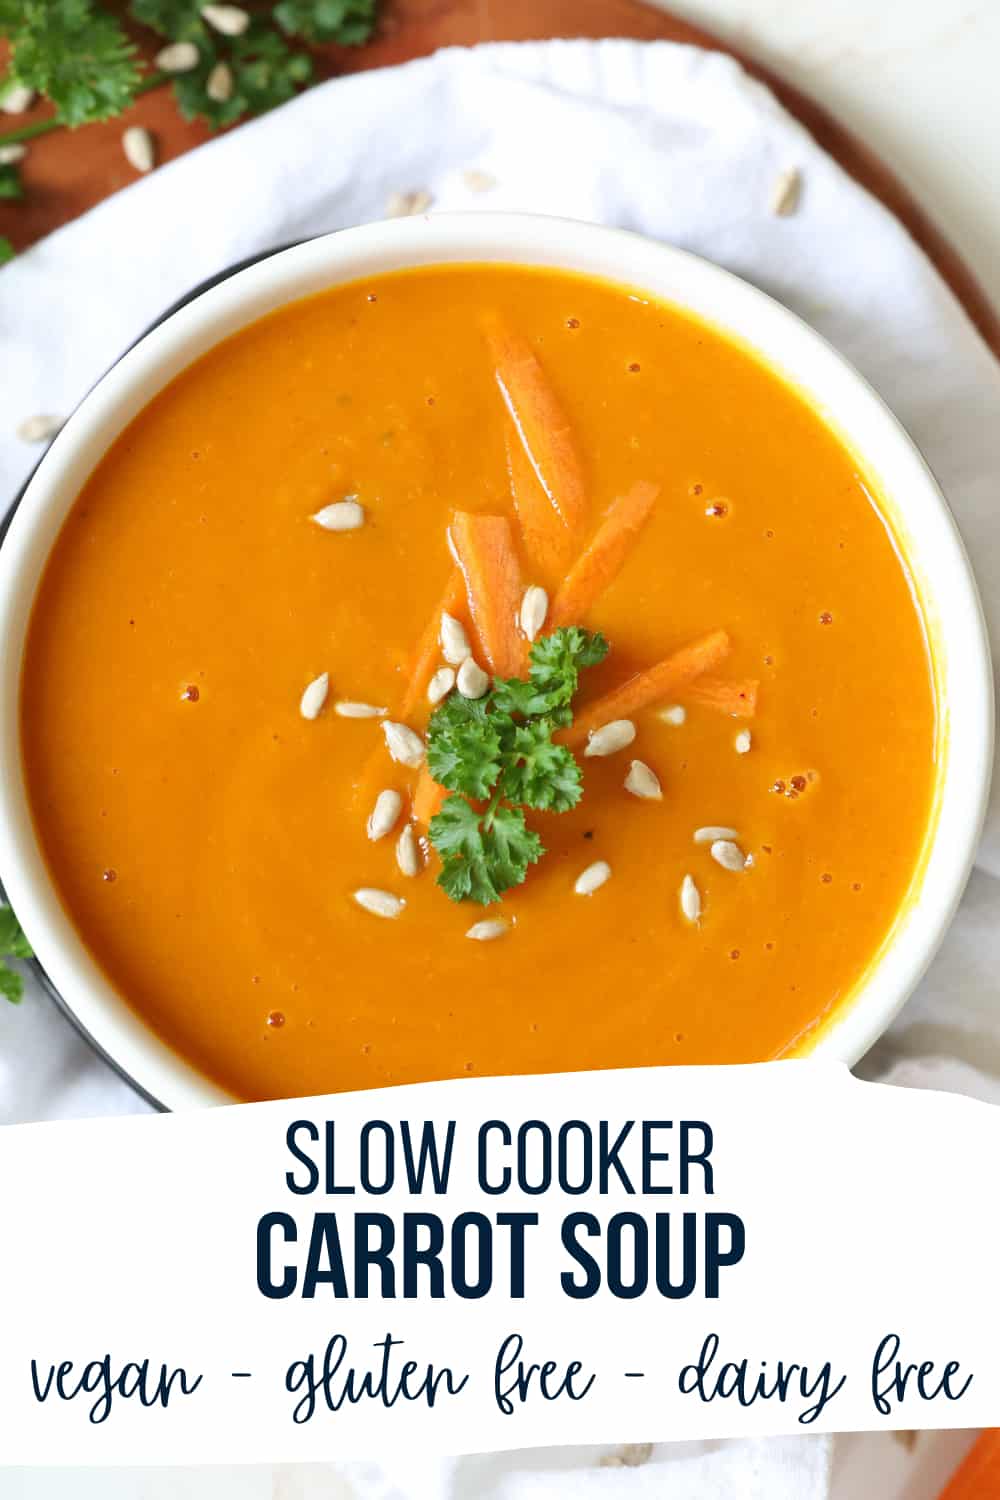 Slow Cooker Carrot Soup